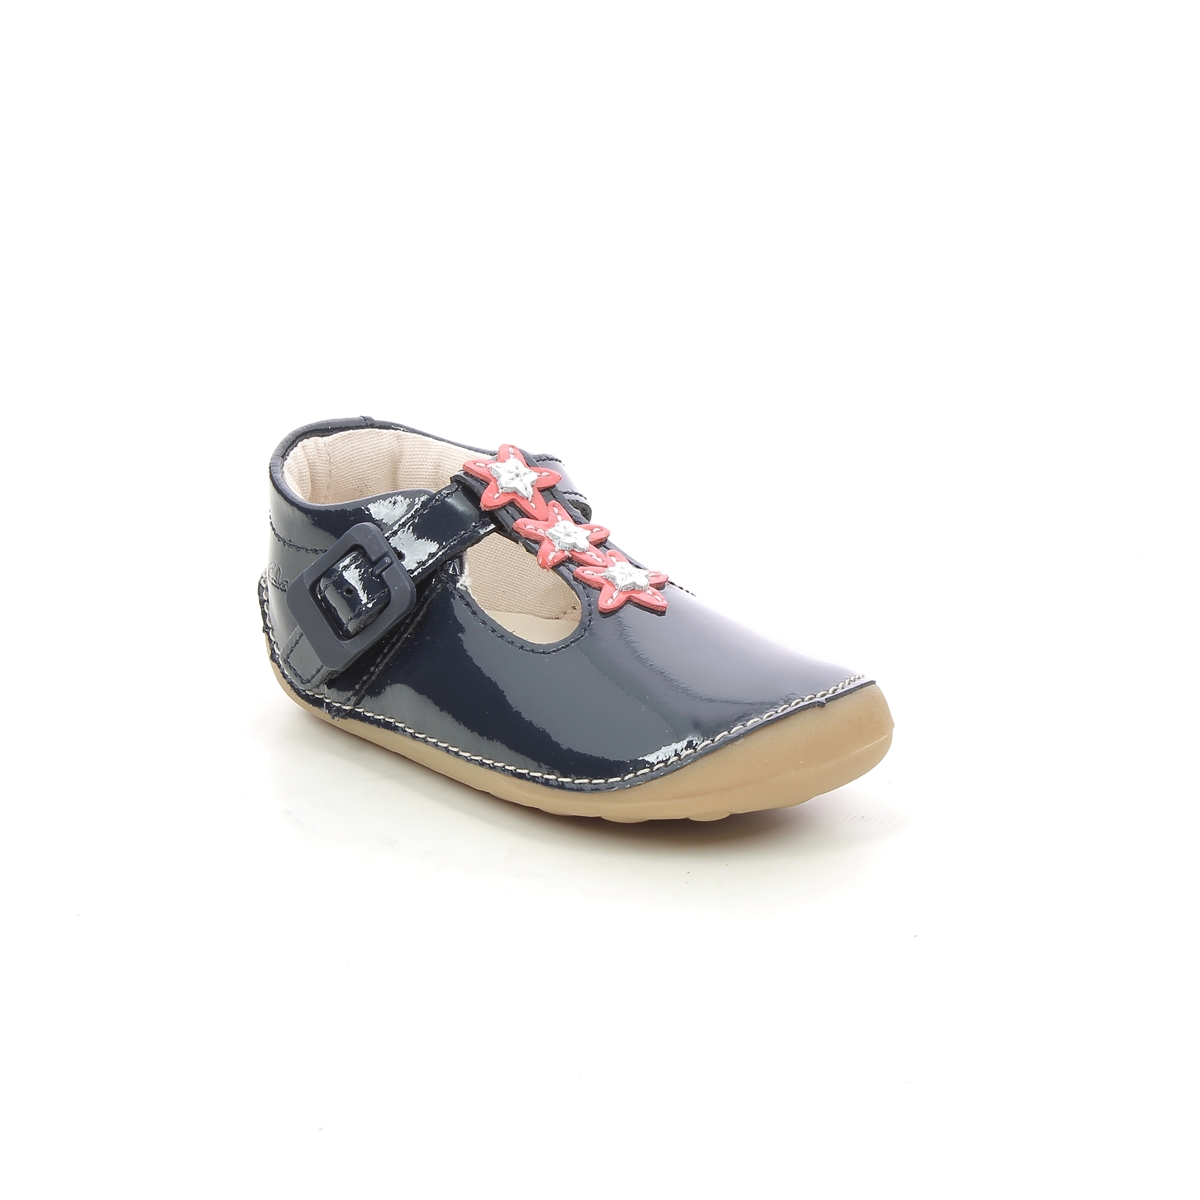 Clarks Tiny Flower T Navy patent Kids girls first and baby shoes 6257-76F in a Plain Leather in Size 3